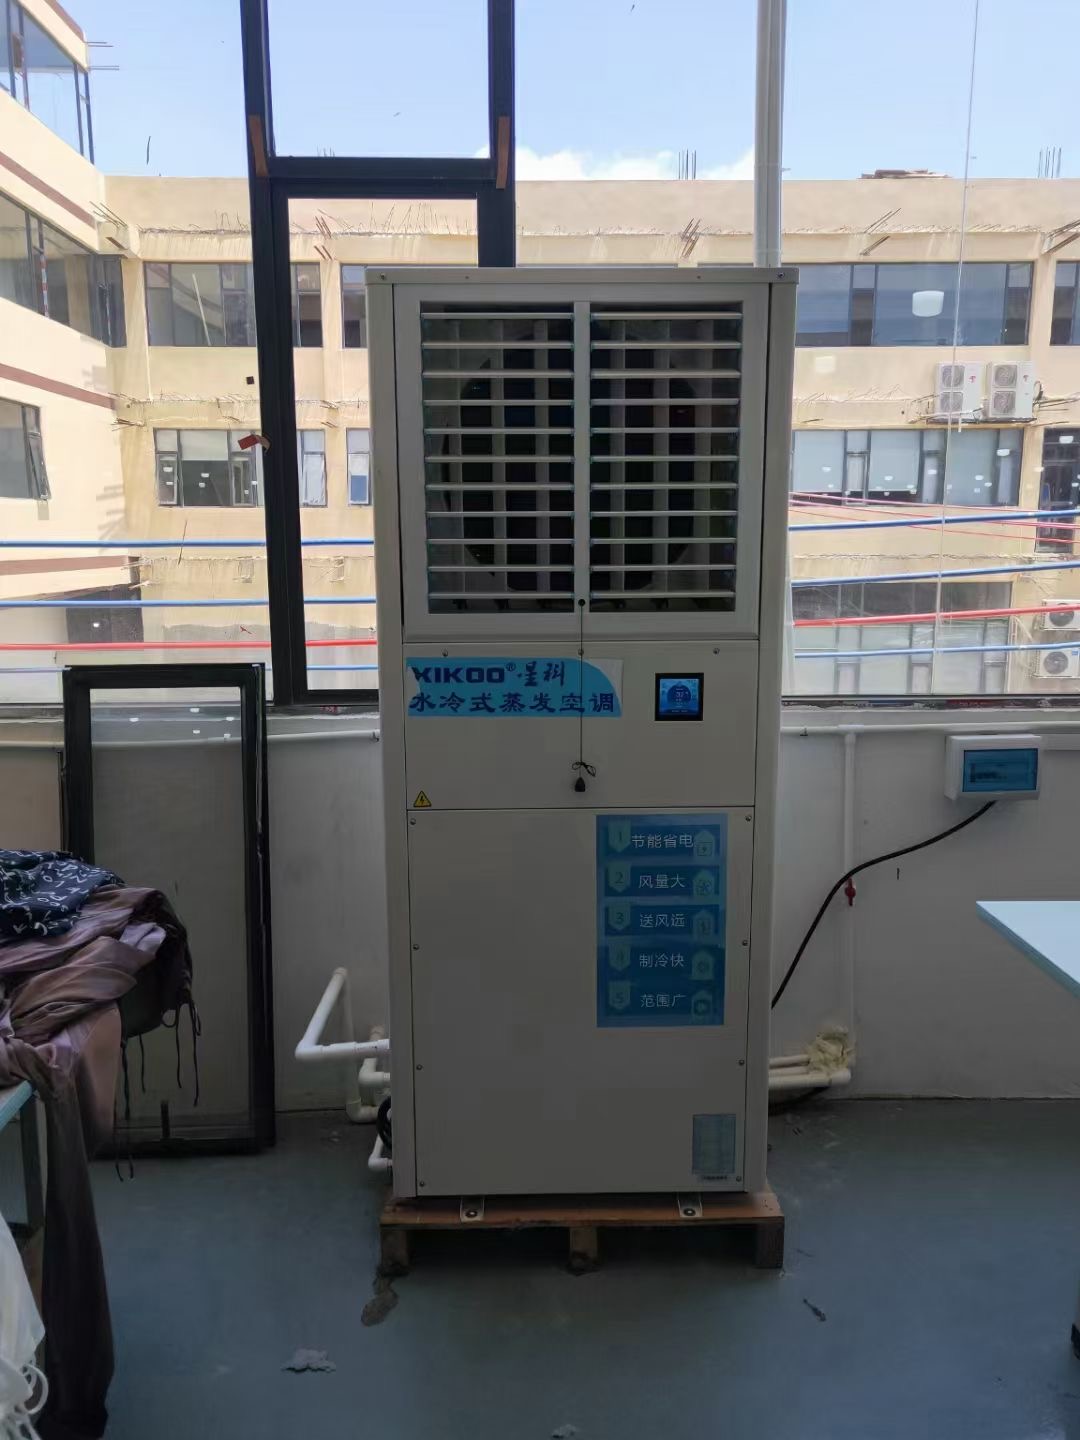 How cold for the industry evaporative air conditioner?